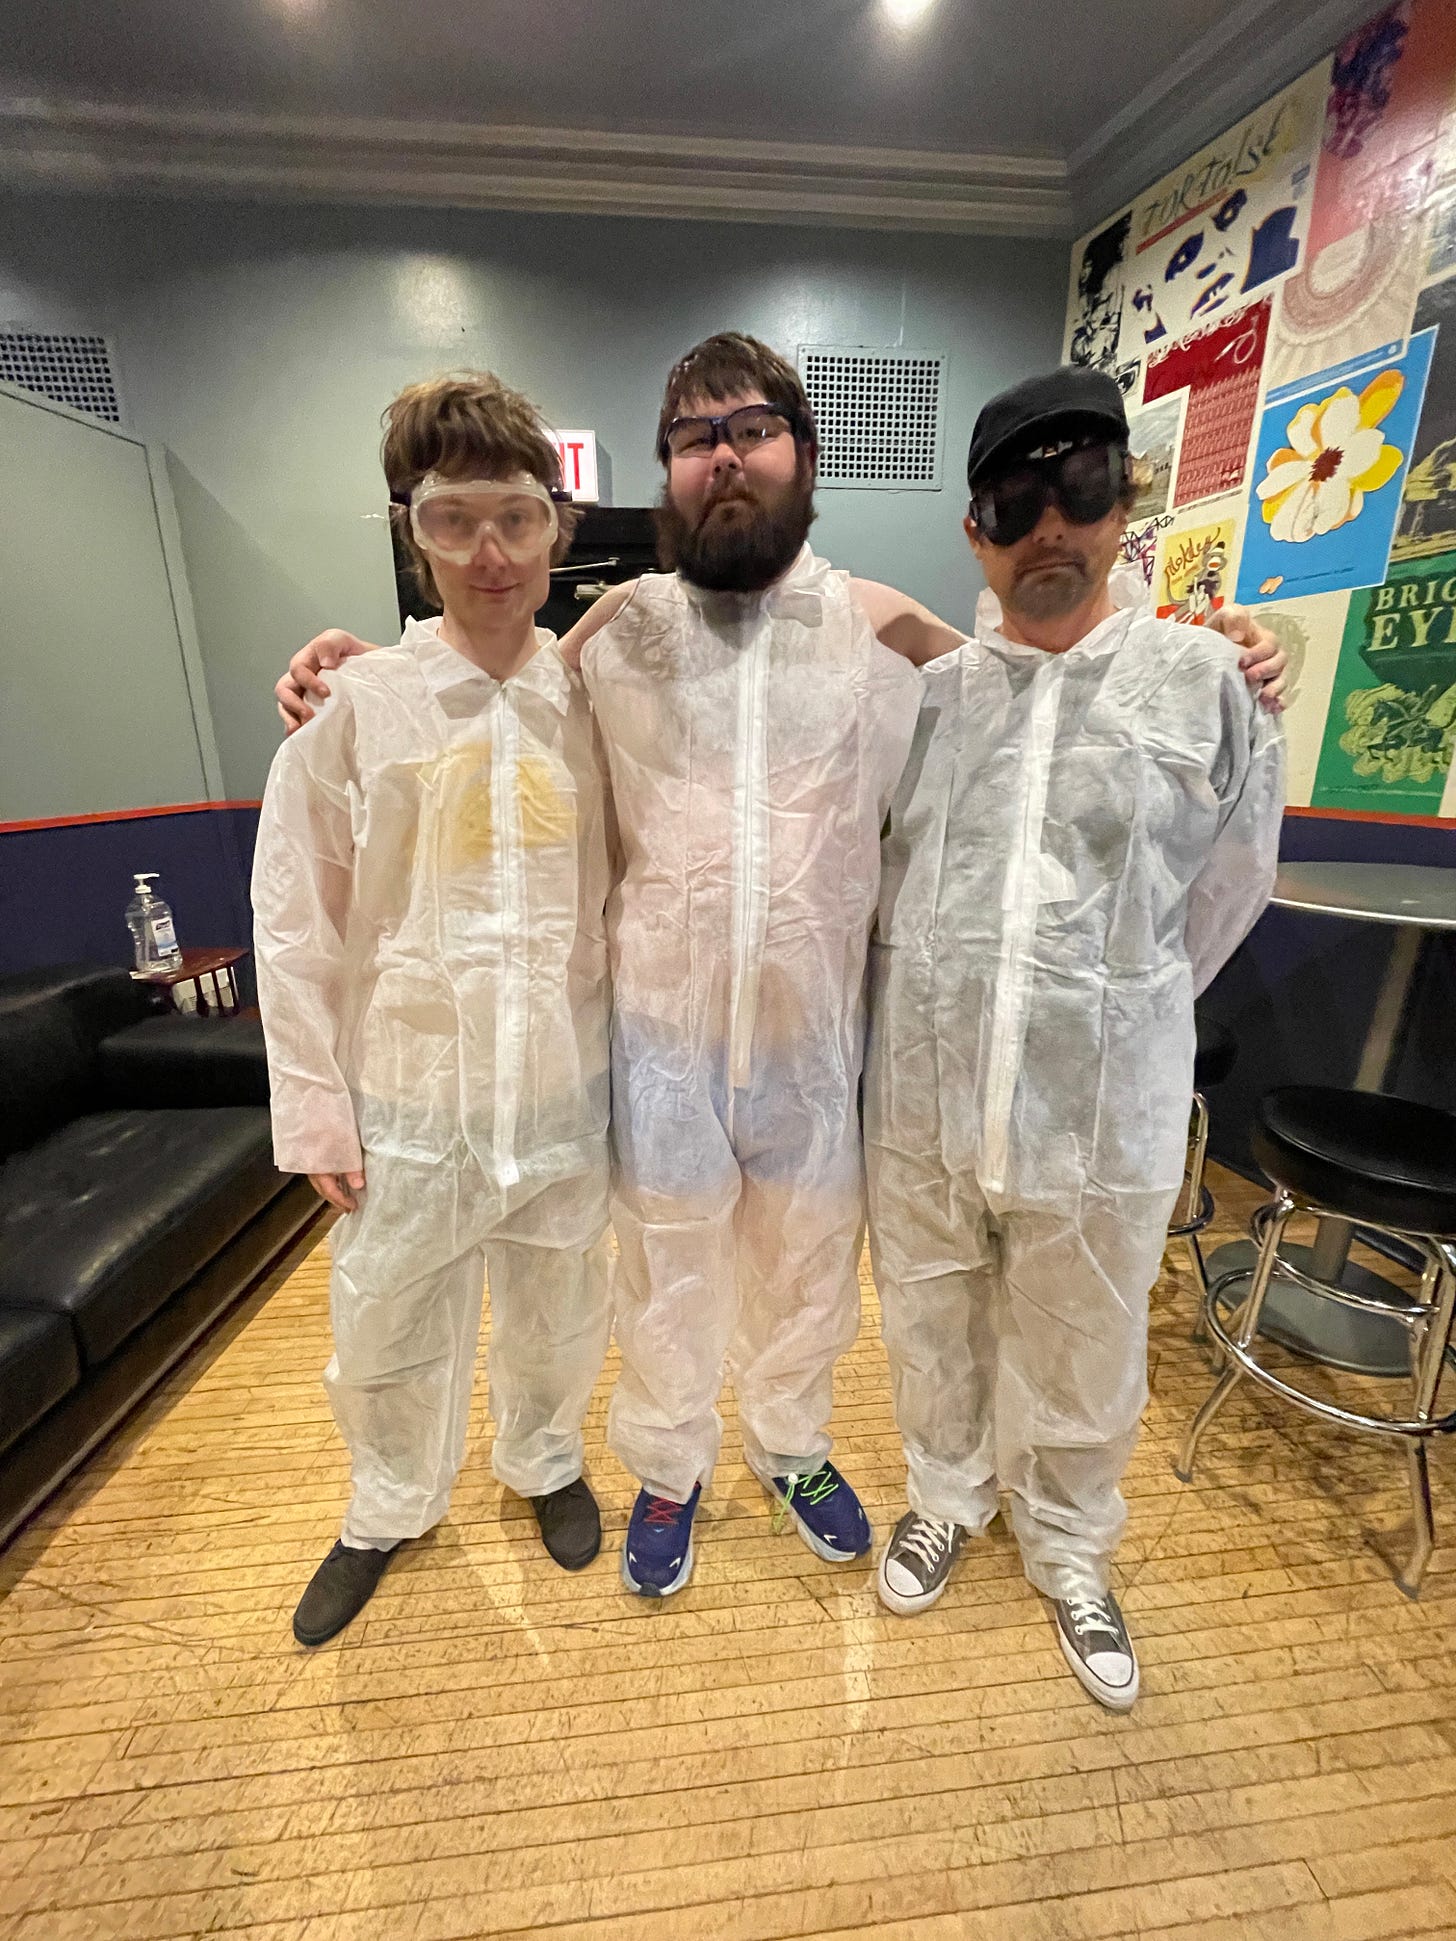 Matt Rizzo, Rick Rizzo and I pose for the camera, standing, wearing disposable white painter suits and goggles, in the dressing room at Metro in Chicago.